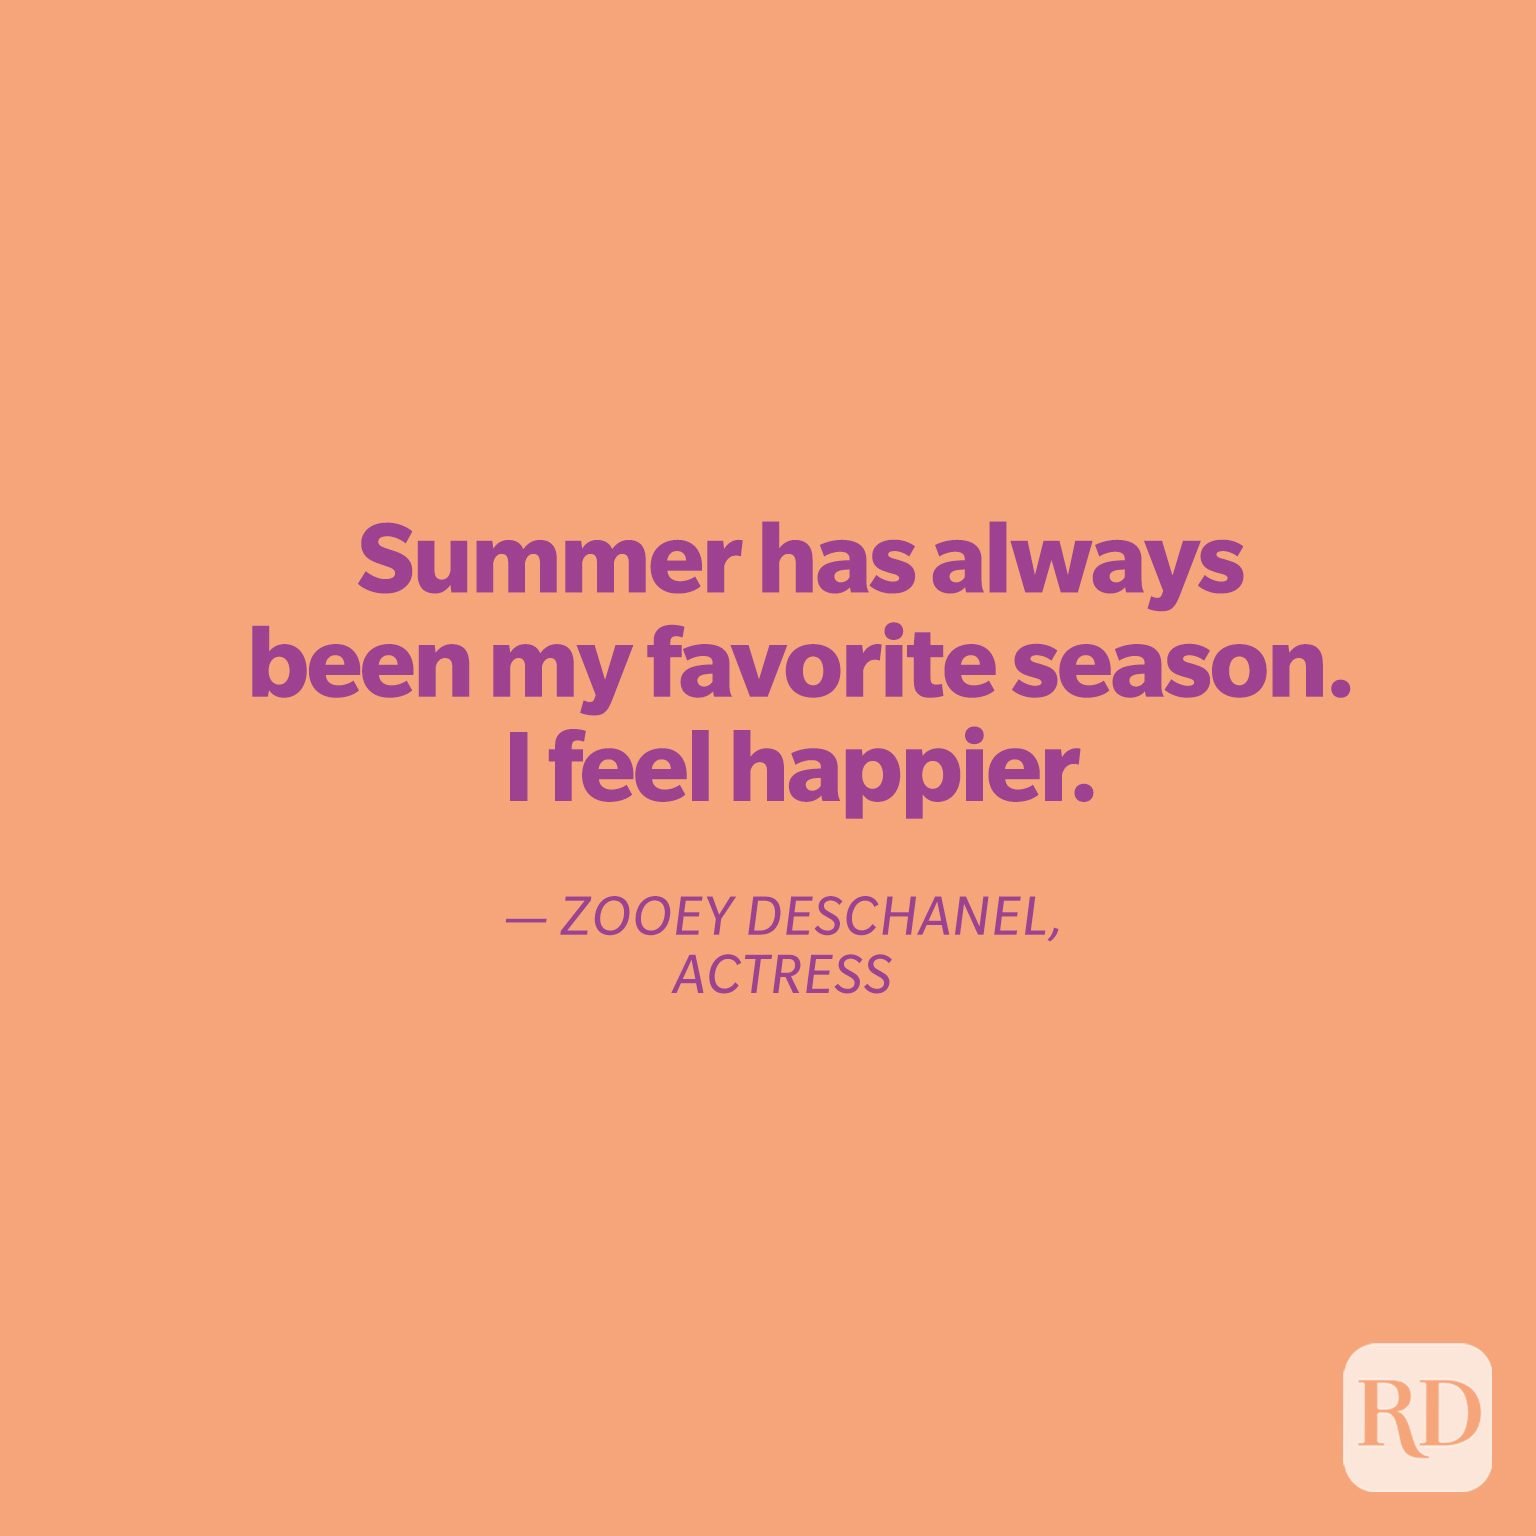 50 Summer Quotes That'll Have You Ready For Good Times And Tan Lines